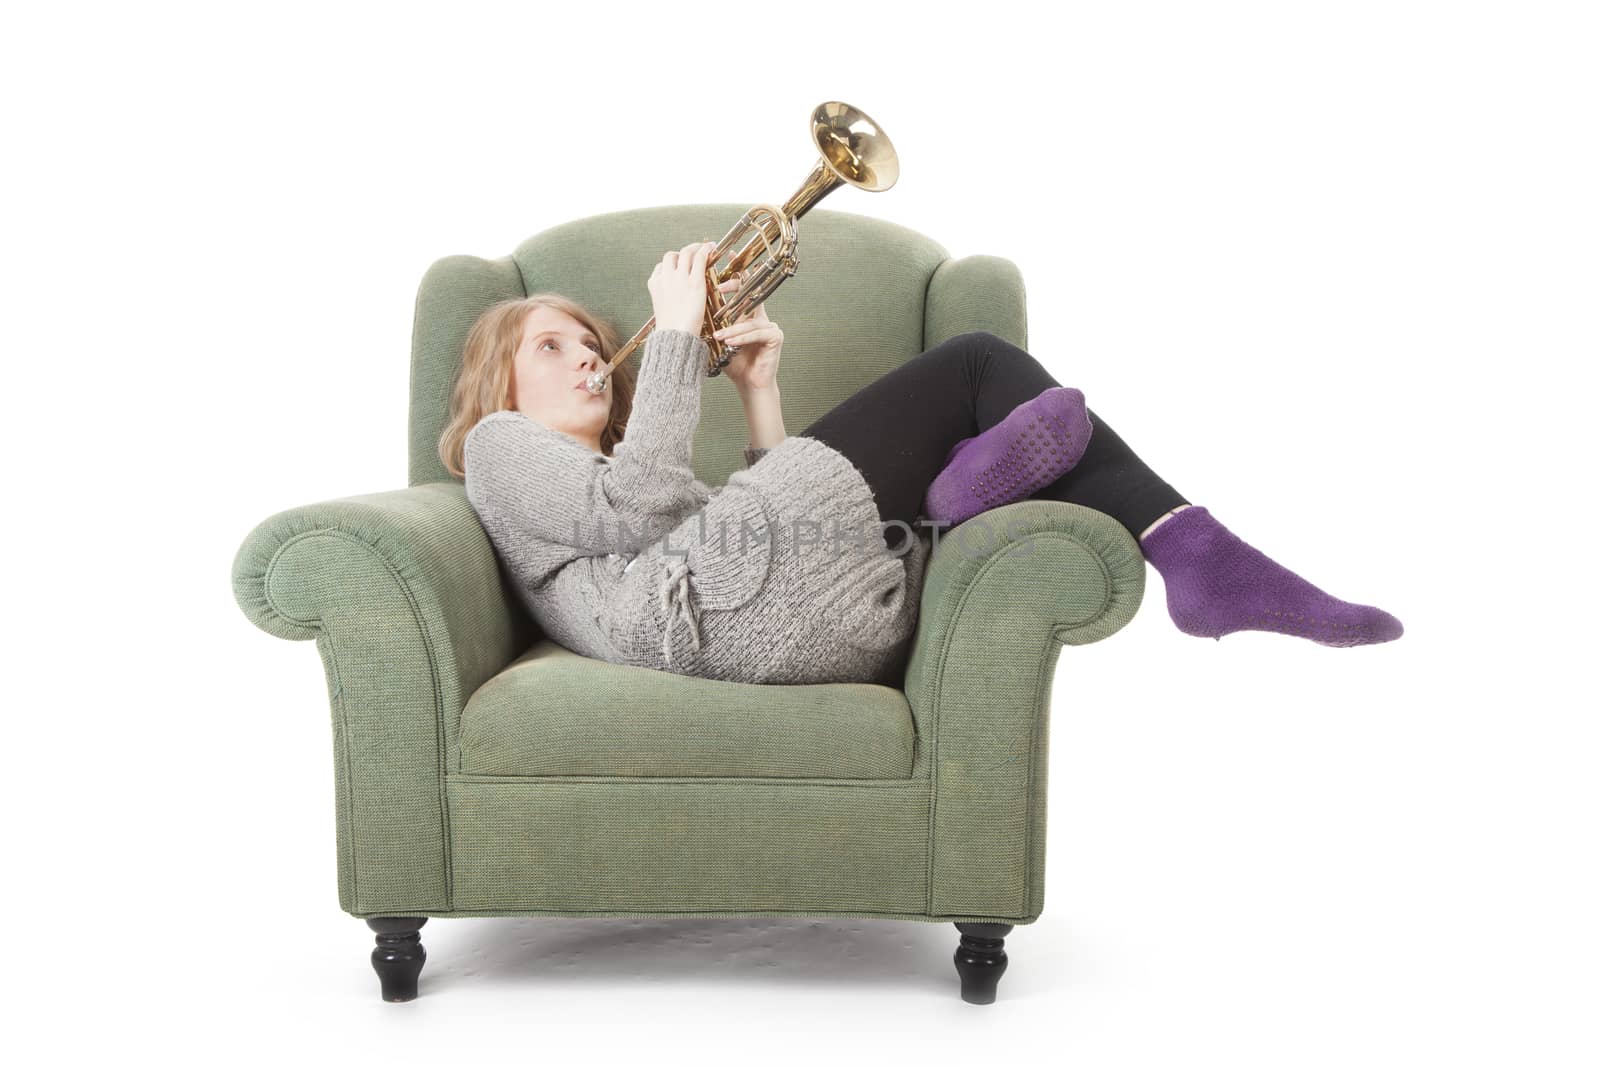 young pretty woman playing the trumpet in an armchair against white background